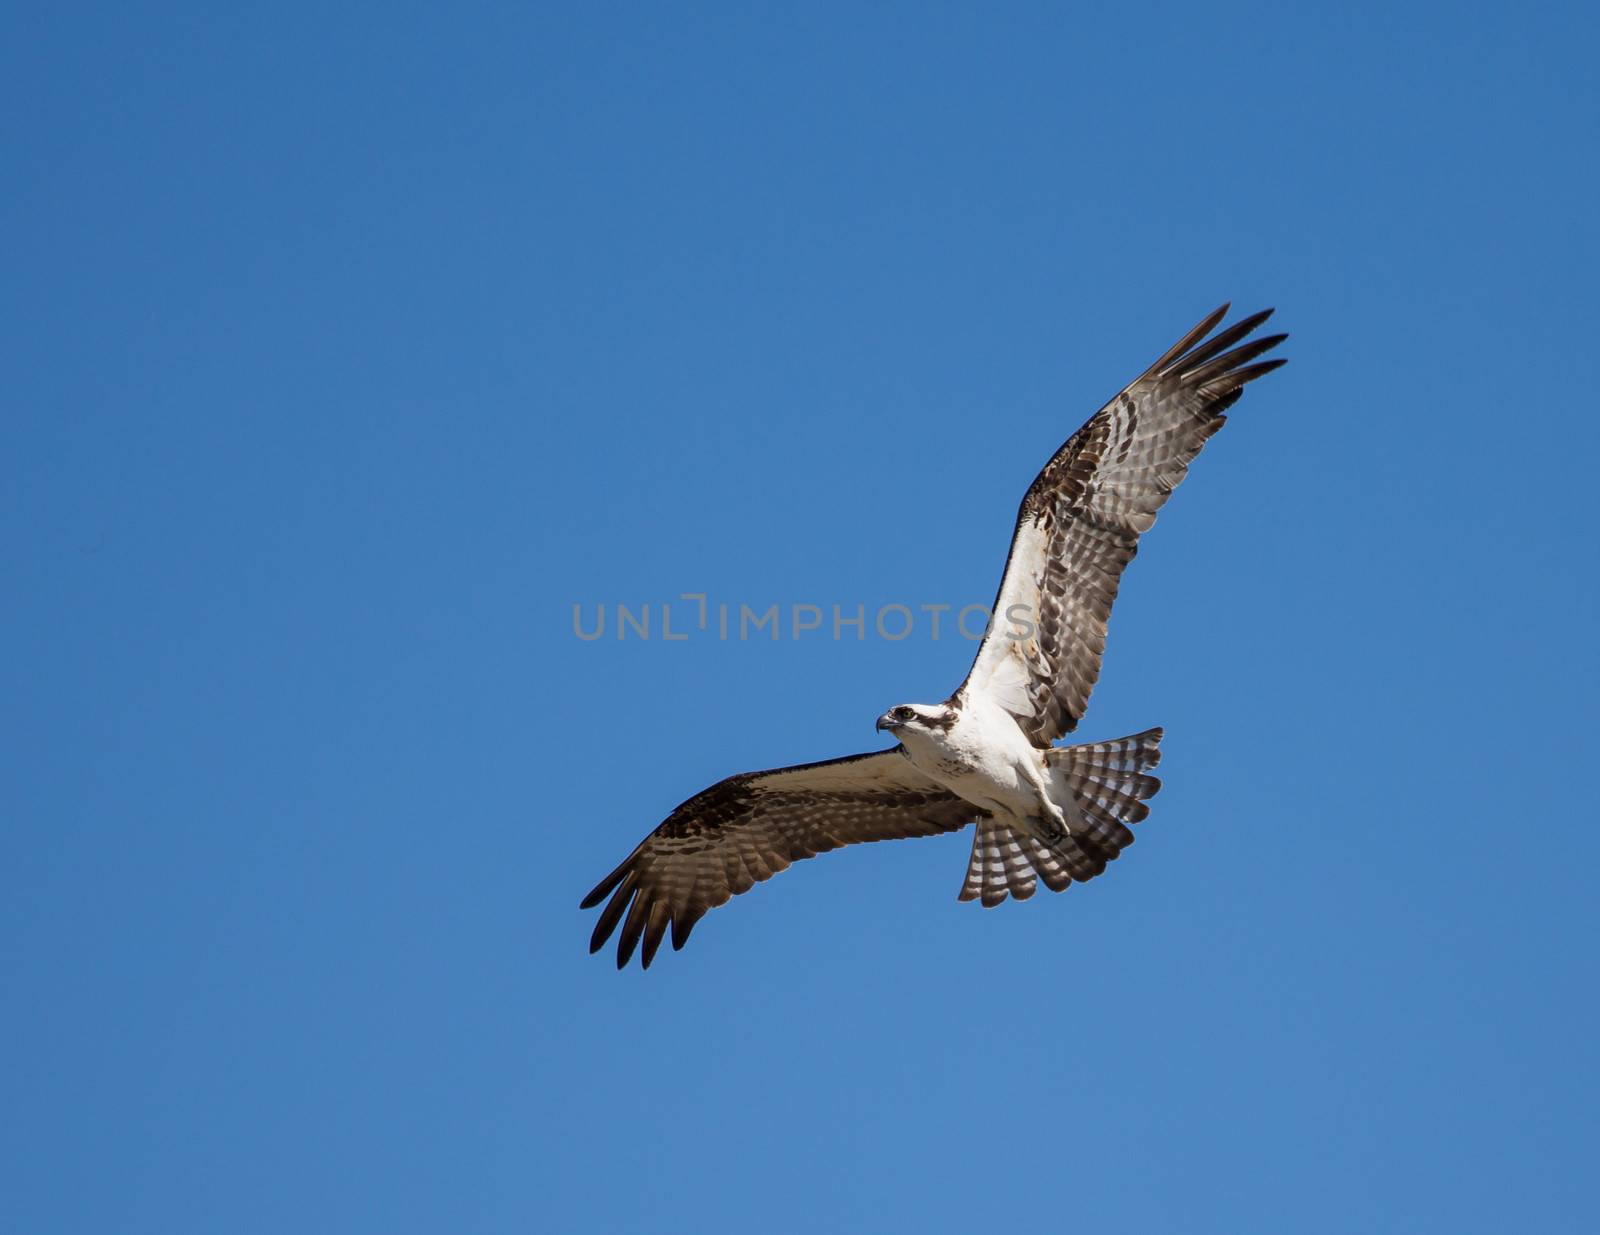 This Osprey is flying over his area on the eternal quest for food.